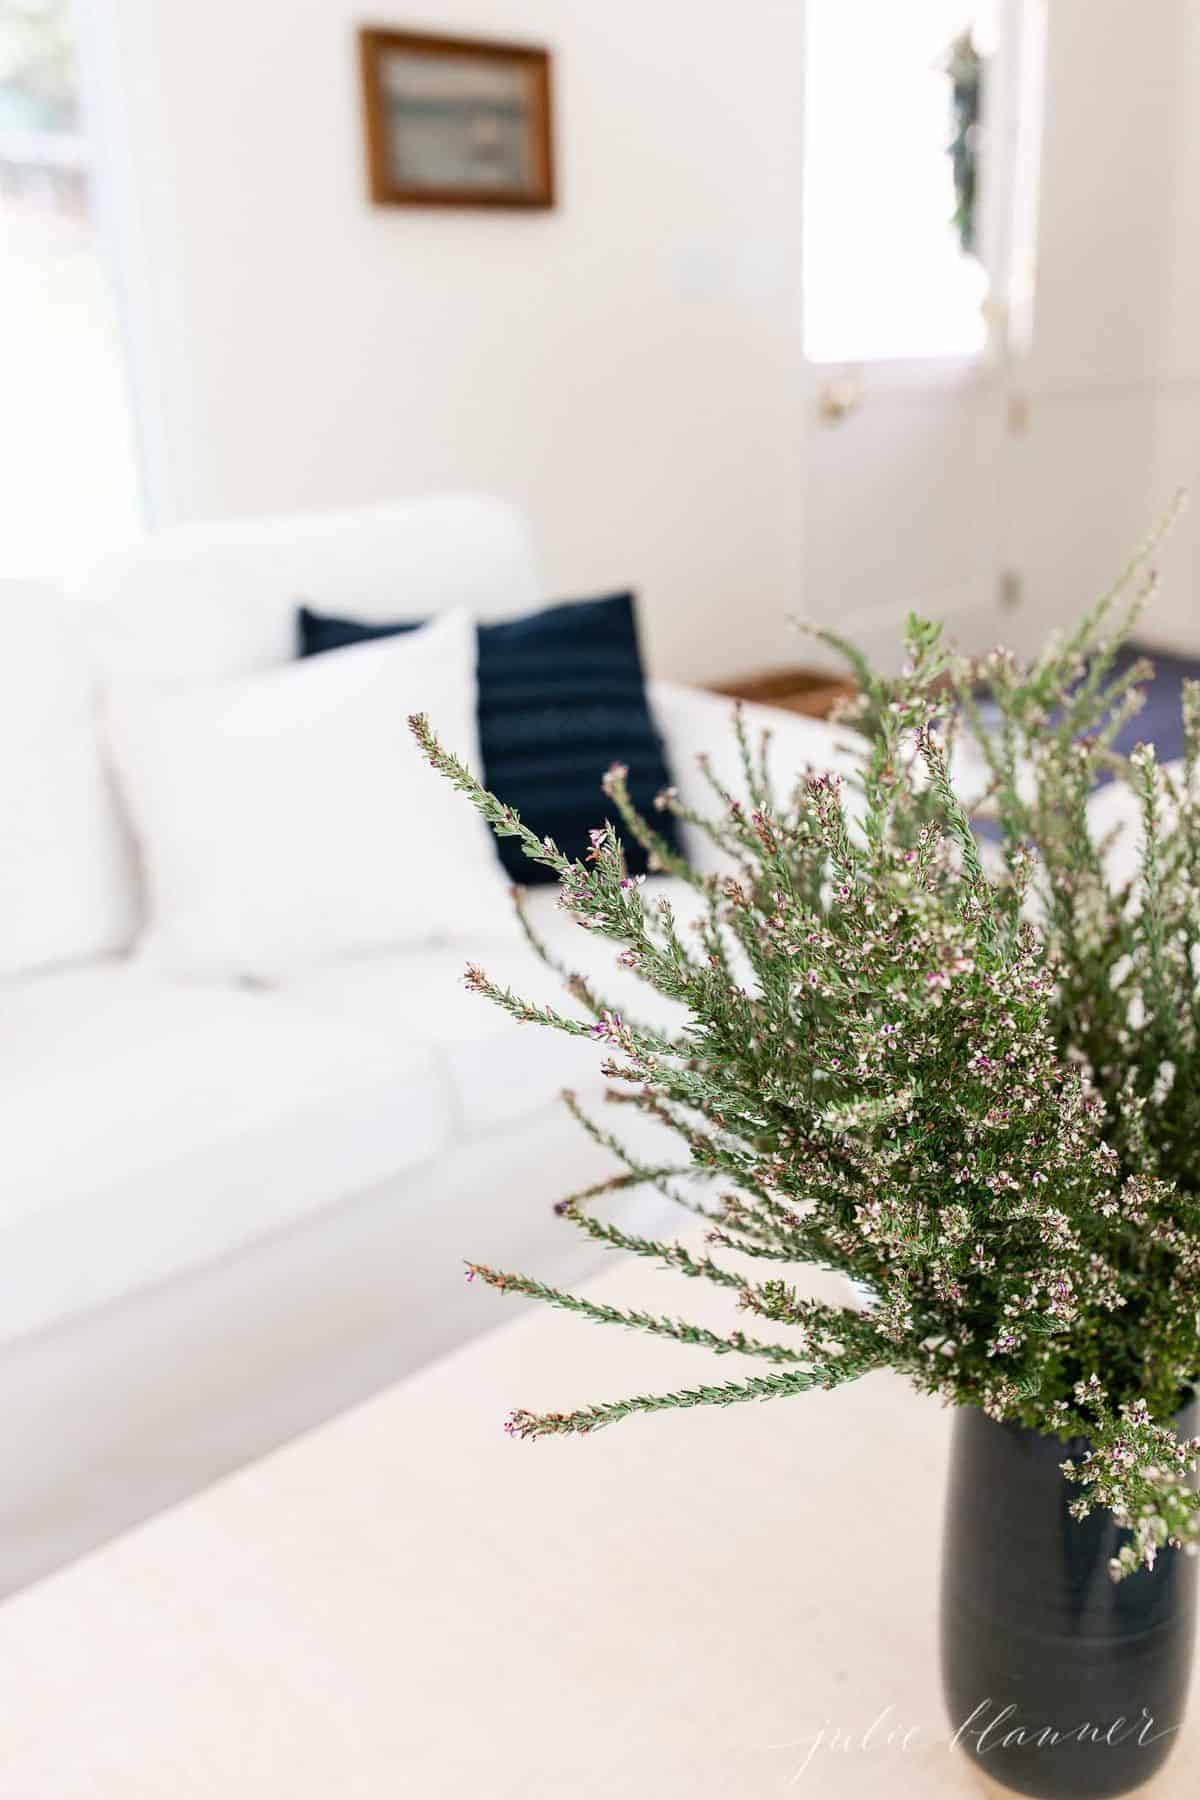 A white living room with navy pillows and a navy vase full of fall wildflowers.